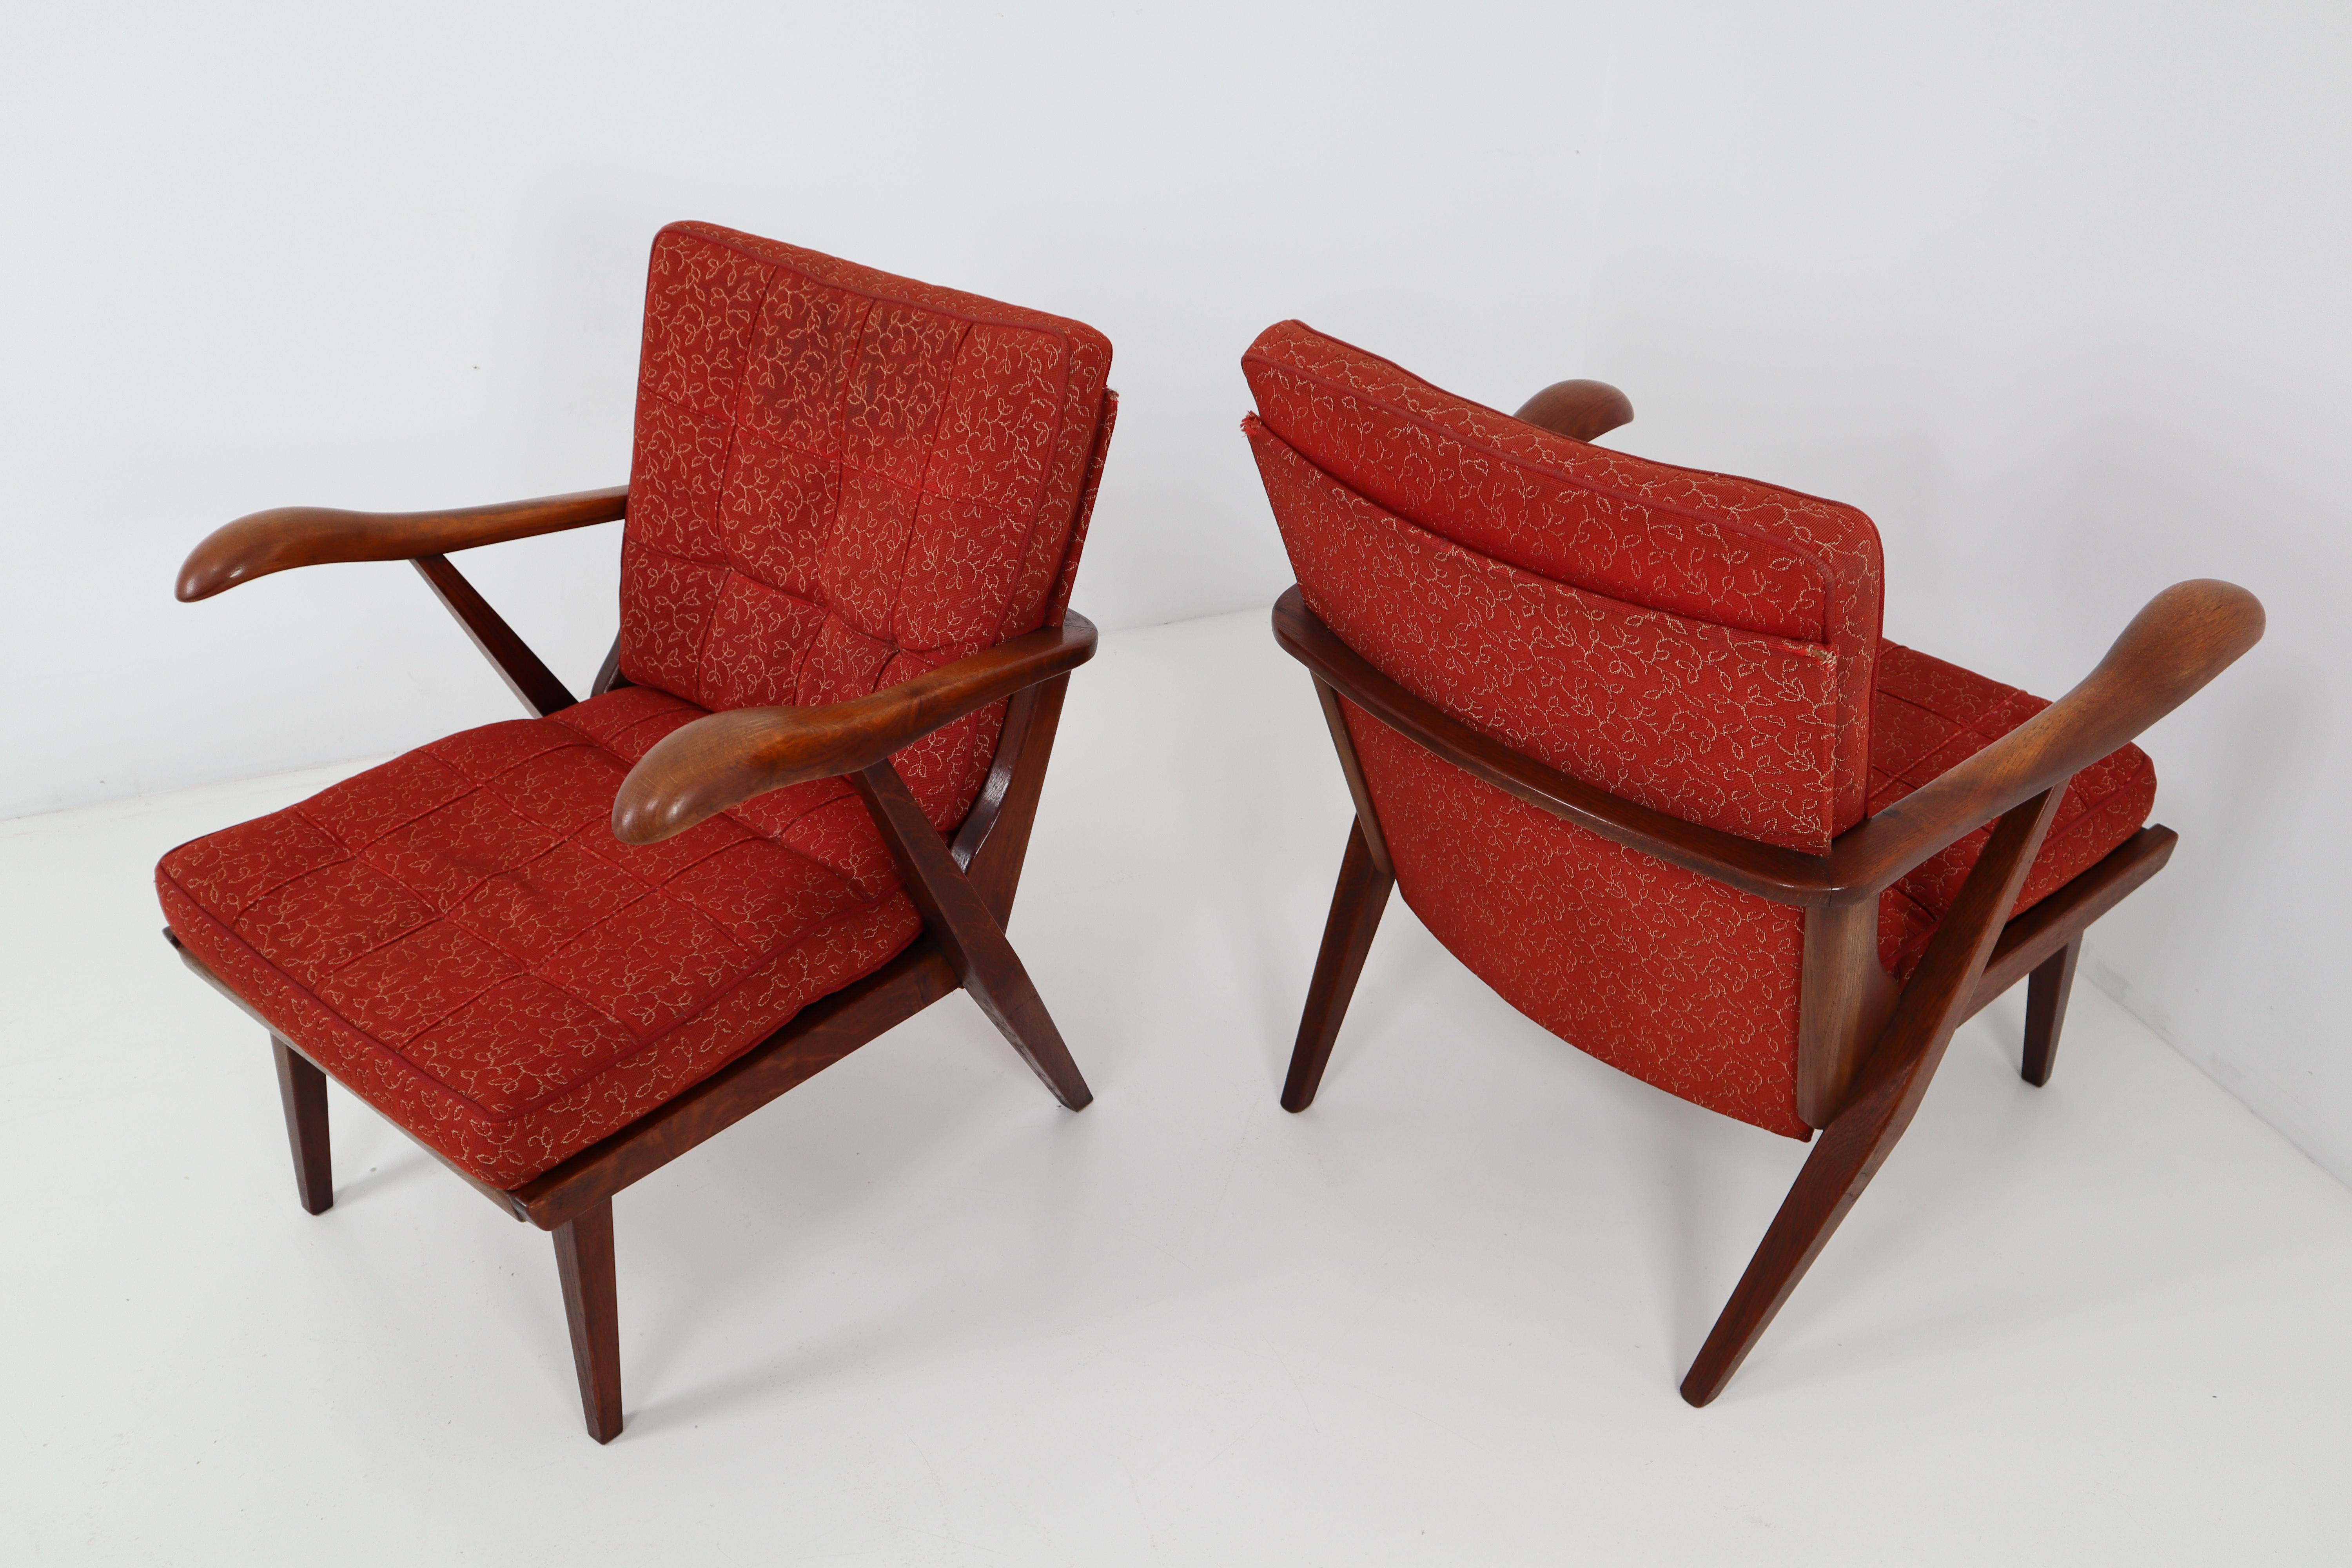 Mid-20th Century Pair of Lounge Chairs with Sculptural Oak Wooden Frame Czech Republic, 1950s